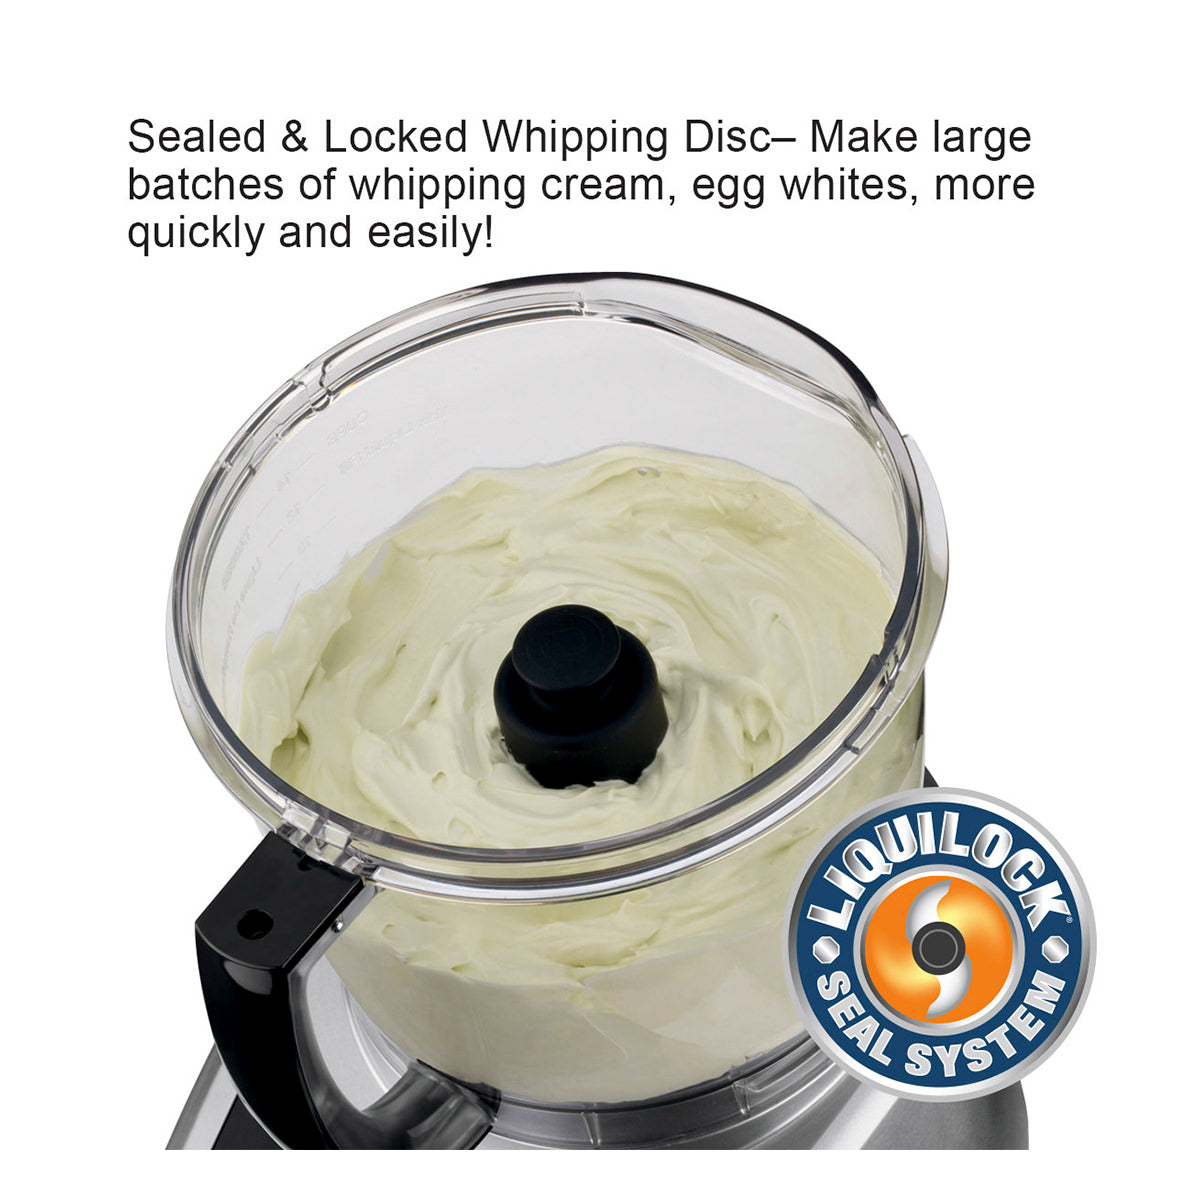 WFP16SCD - 4-Qt. Combination Bowl Cutter Mixer and Continuous-Feed with Dicing and LiquiLock Seal by Waring Commercial